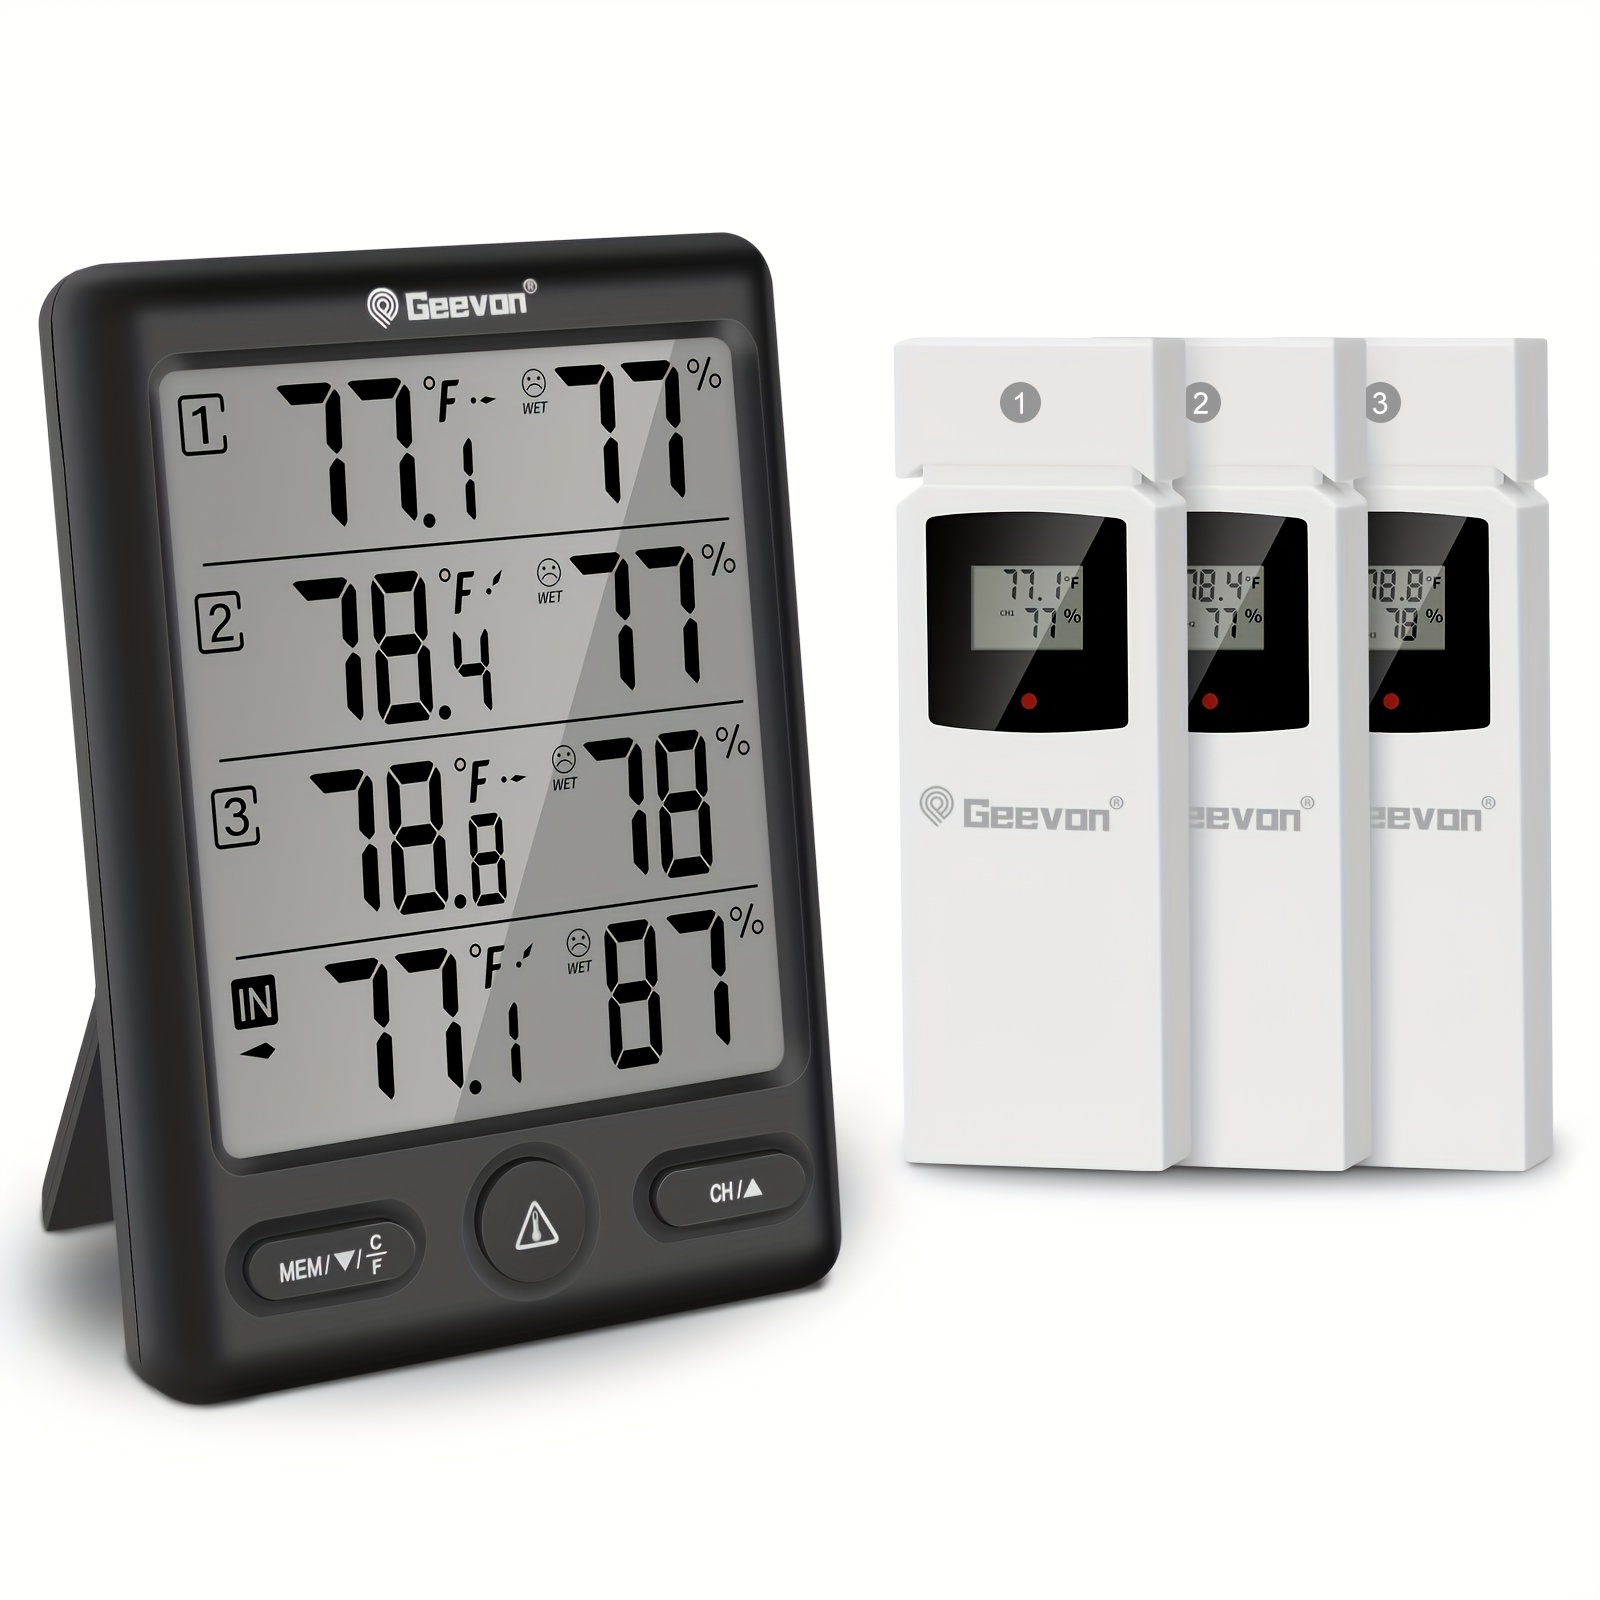 ThermoPro WiFi Thermometer Hygrometer TP90, Compatible with Alexa, Smart Humidity Temperature Sensor with App, Wireless Home Temperature and Humidity